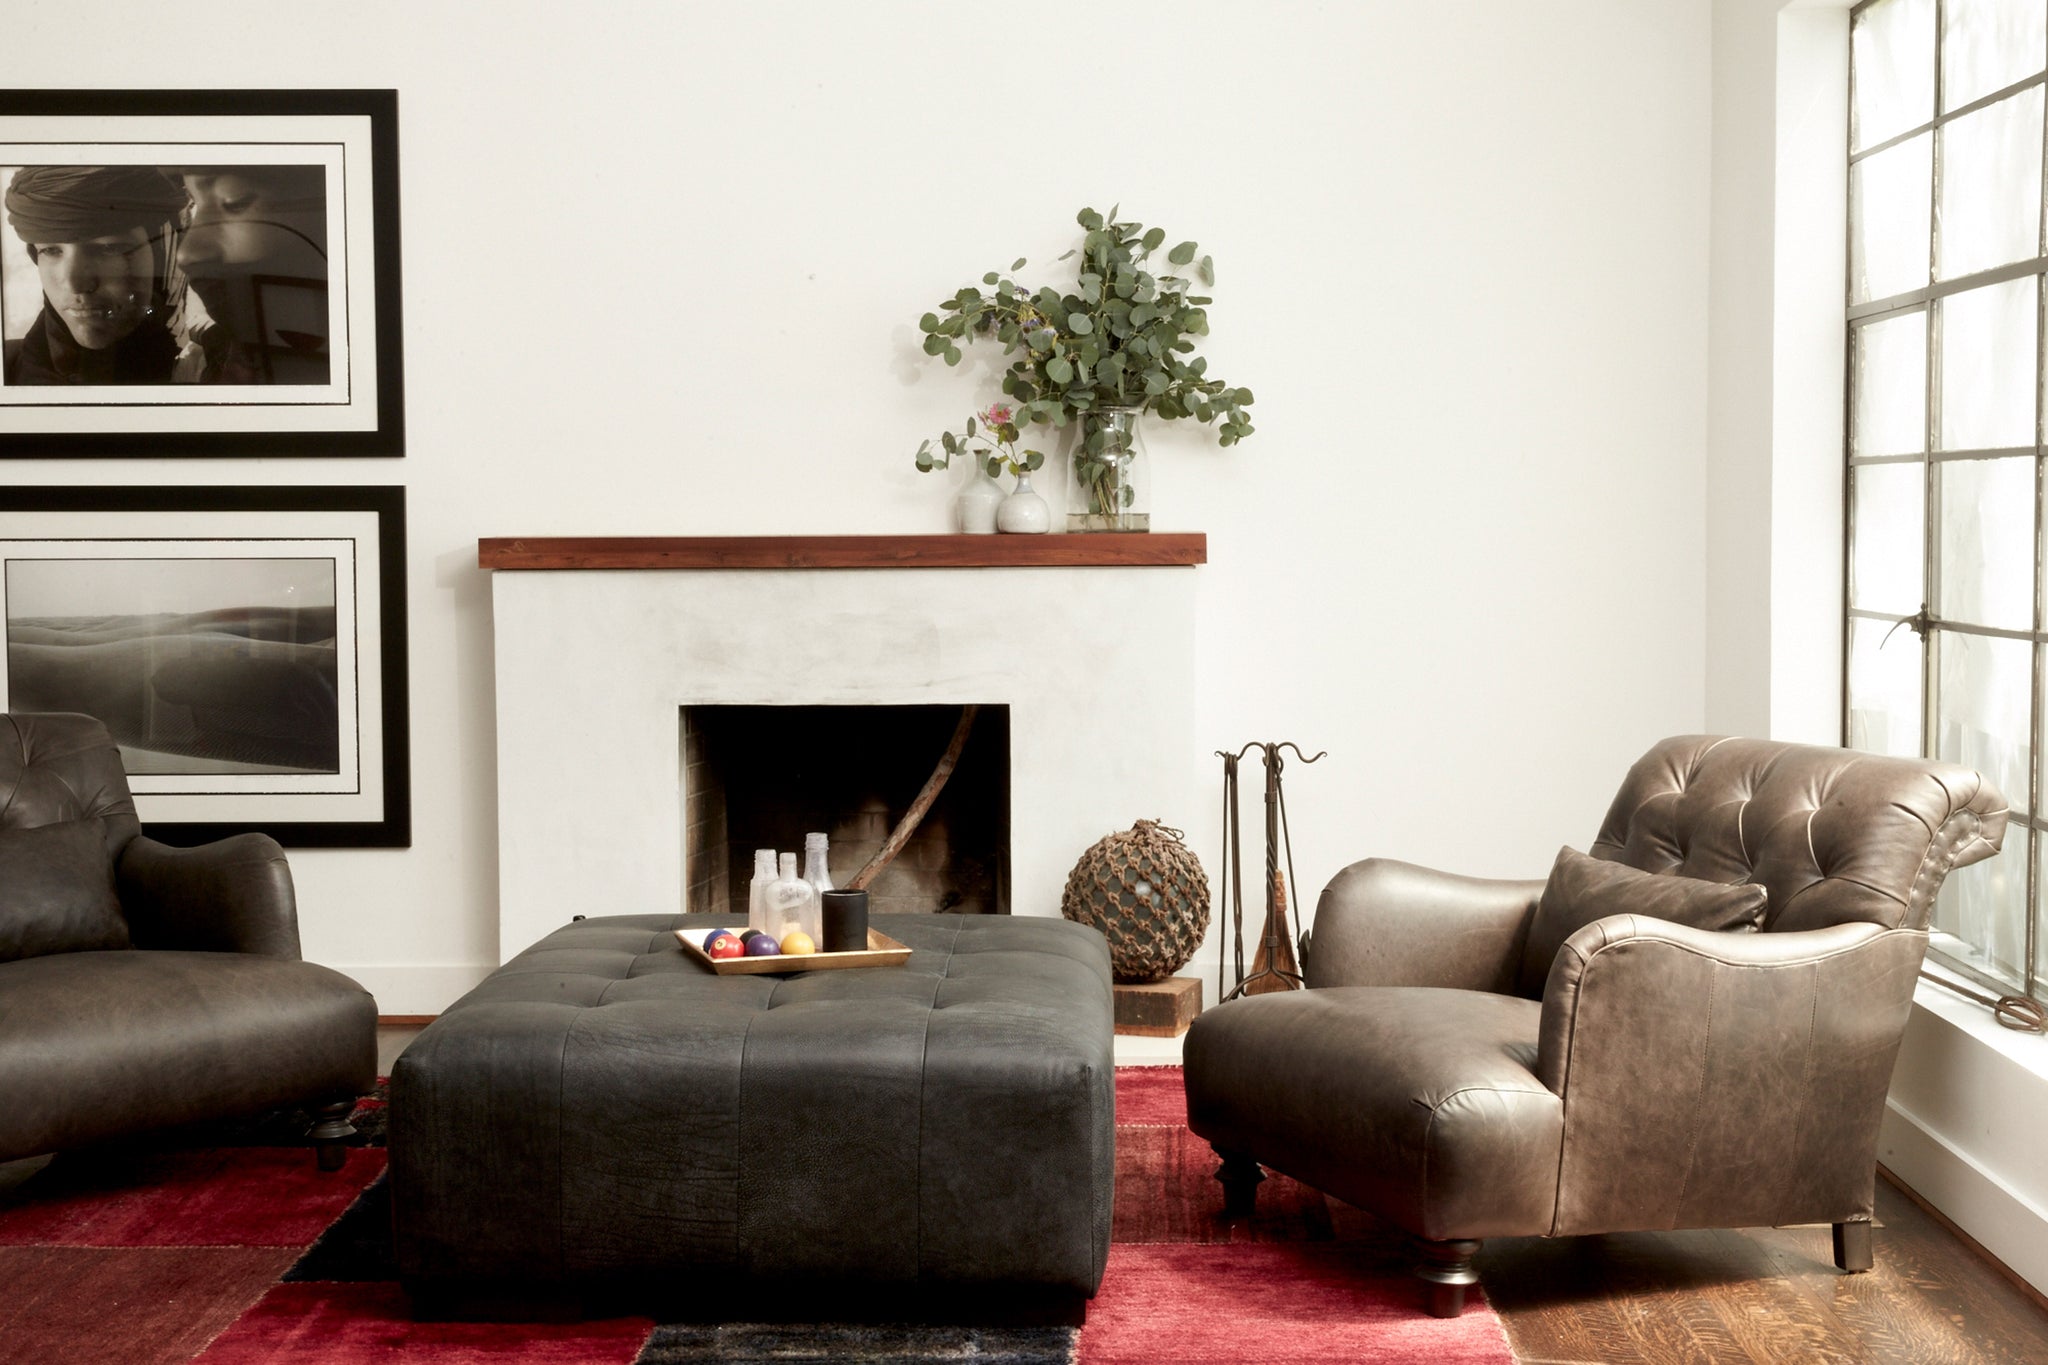  Arden Ottoman in Indiana Charcoal next to two leather chairs. Photographed in Indiana Charcoal. 